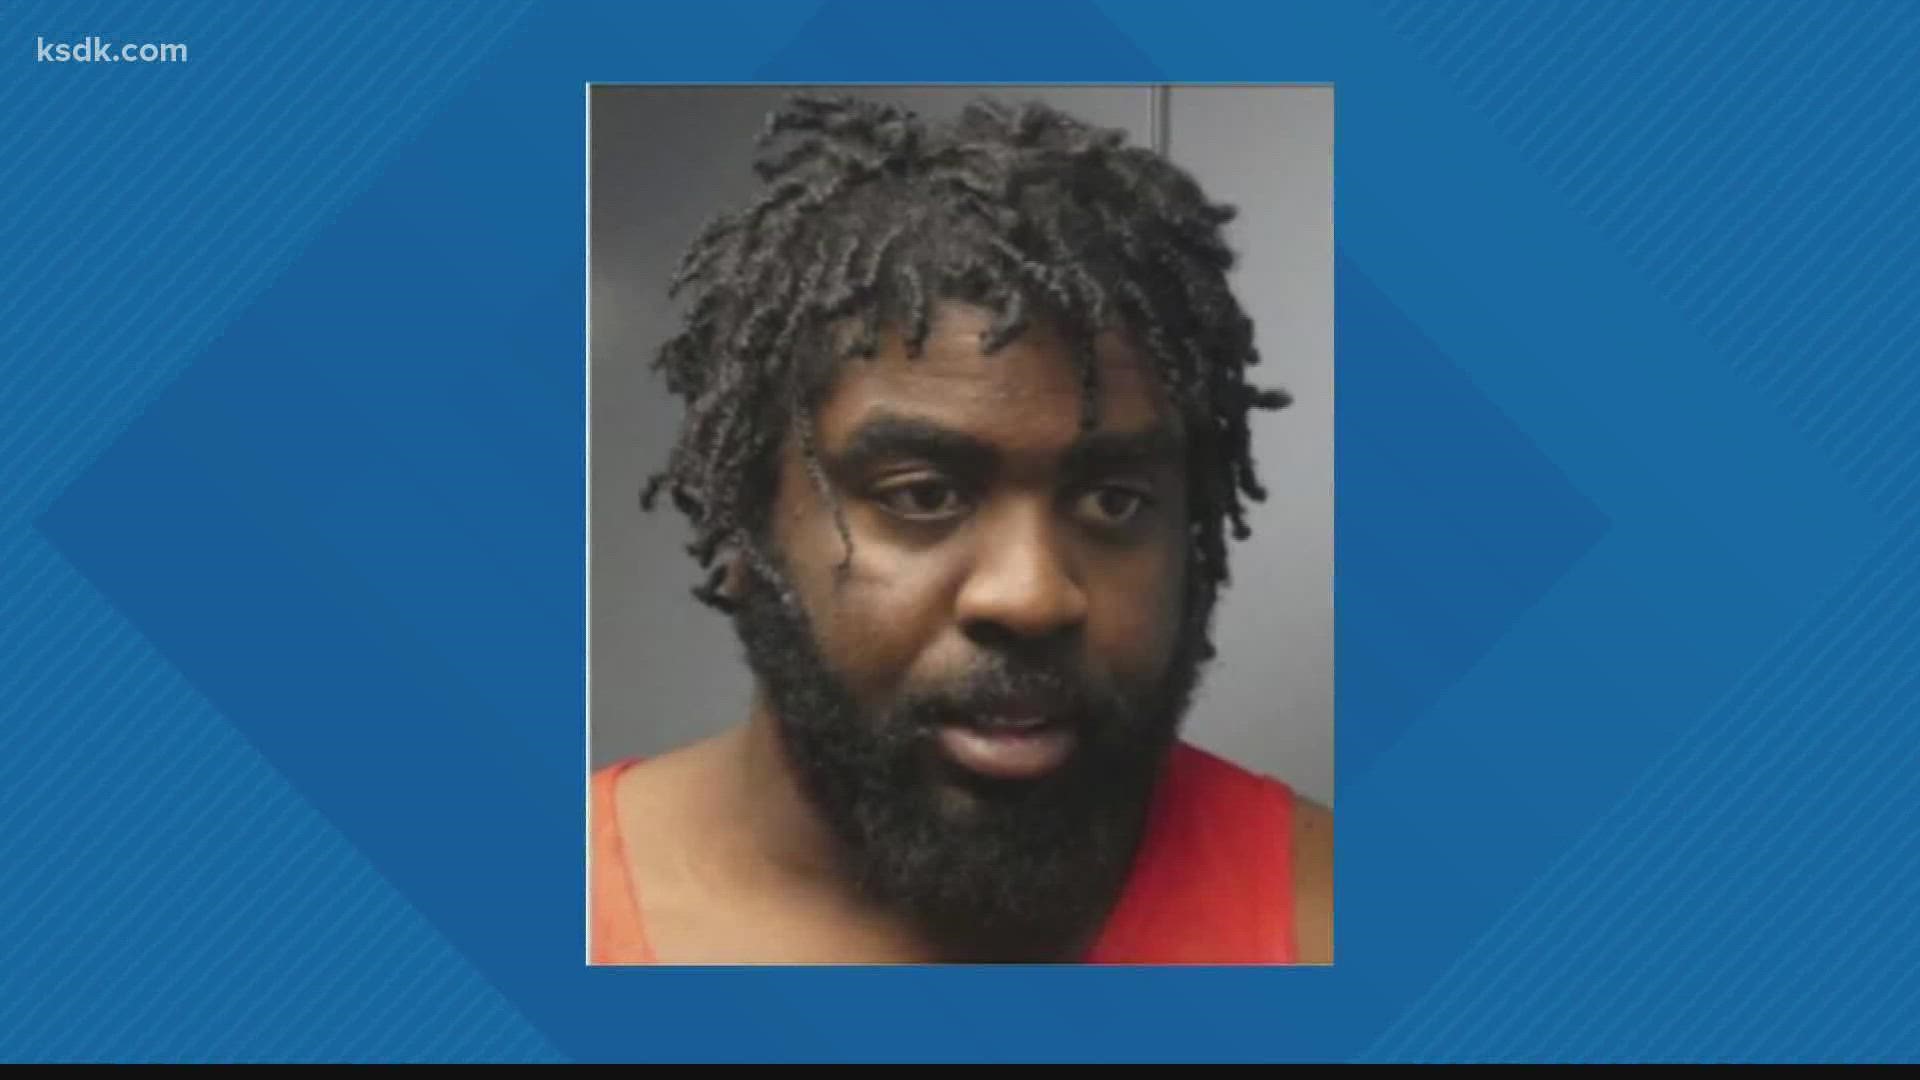 Isaiah Houston was charged in connection with his arrest Monday night. He is a person of interest in the shooting that left a MetroBus driver fighting for his life.